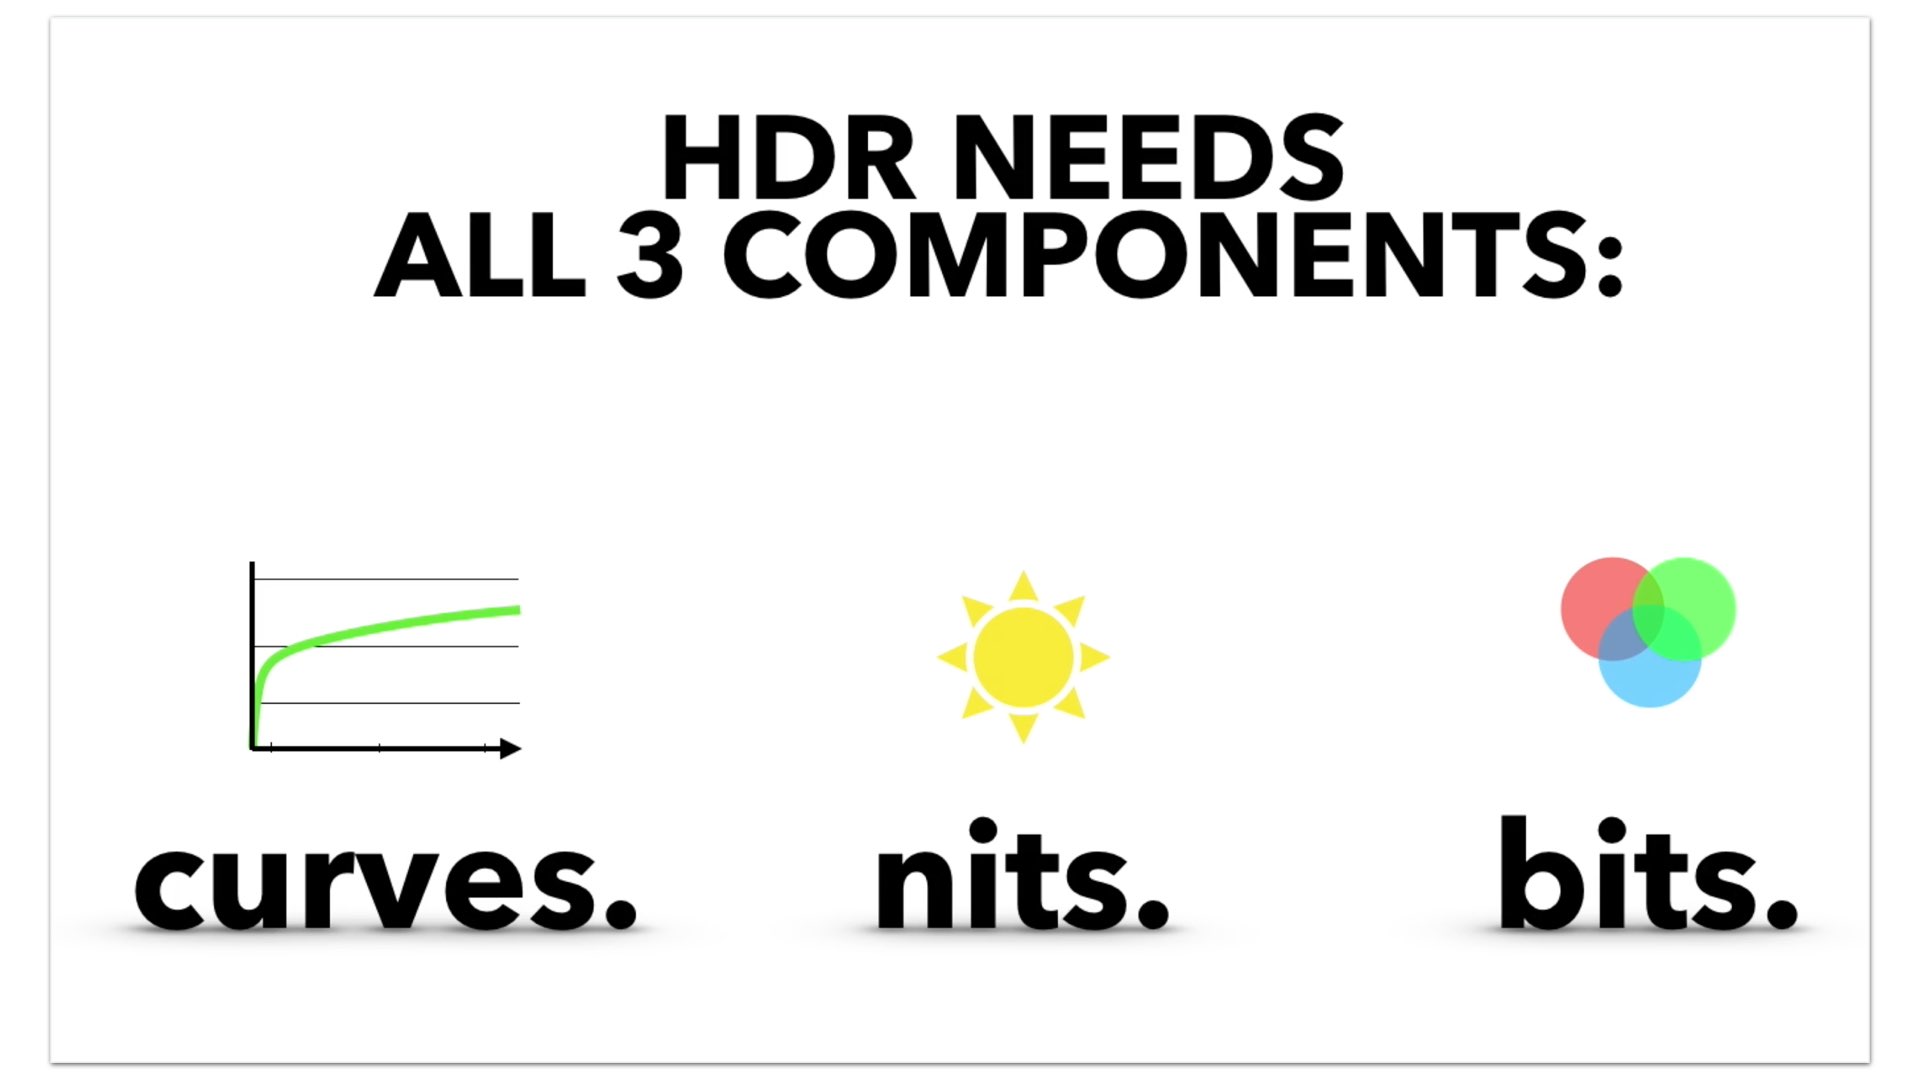 HDR components